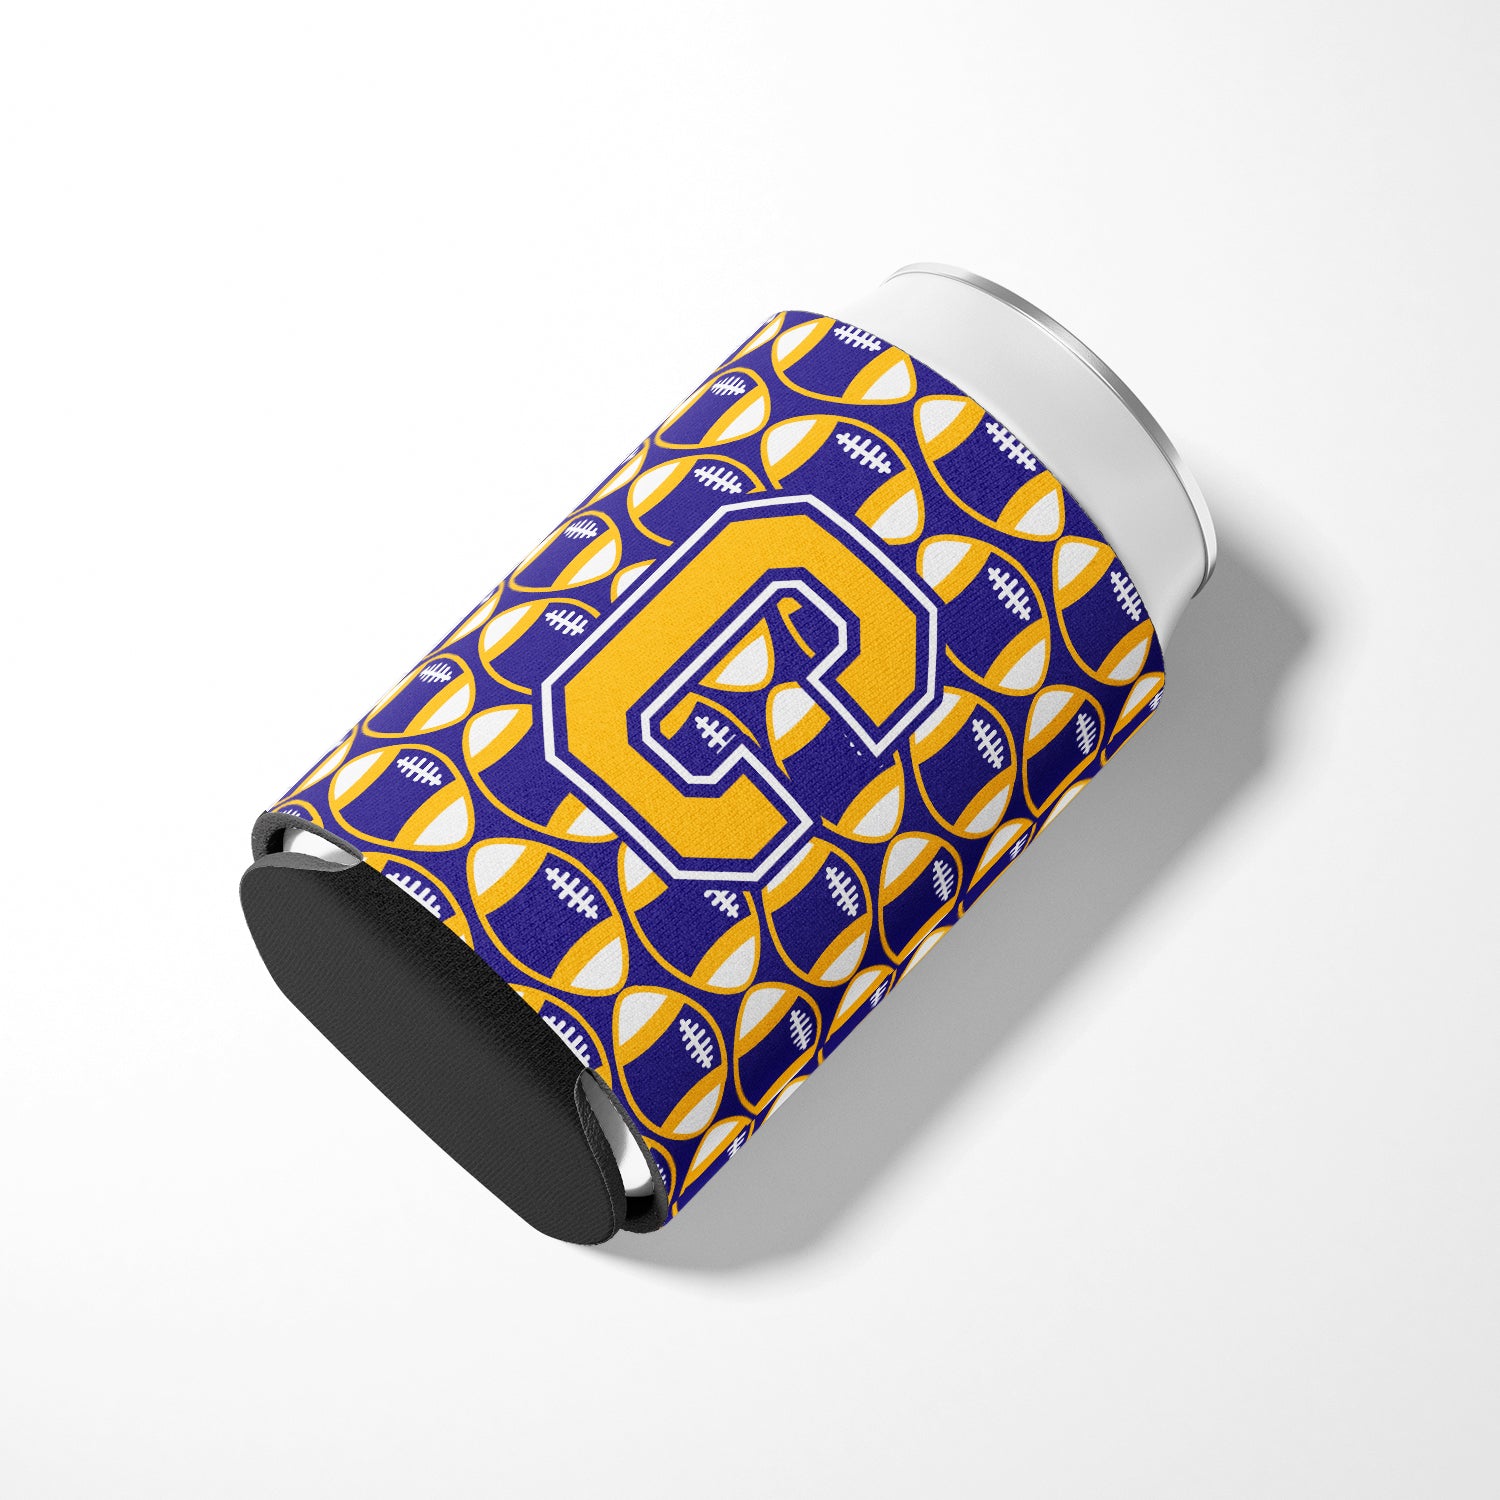 Letter C Football Purple and Gold Can or Bottle Hugger CJ1064-CCC